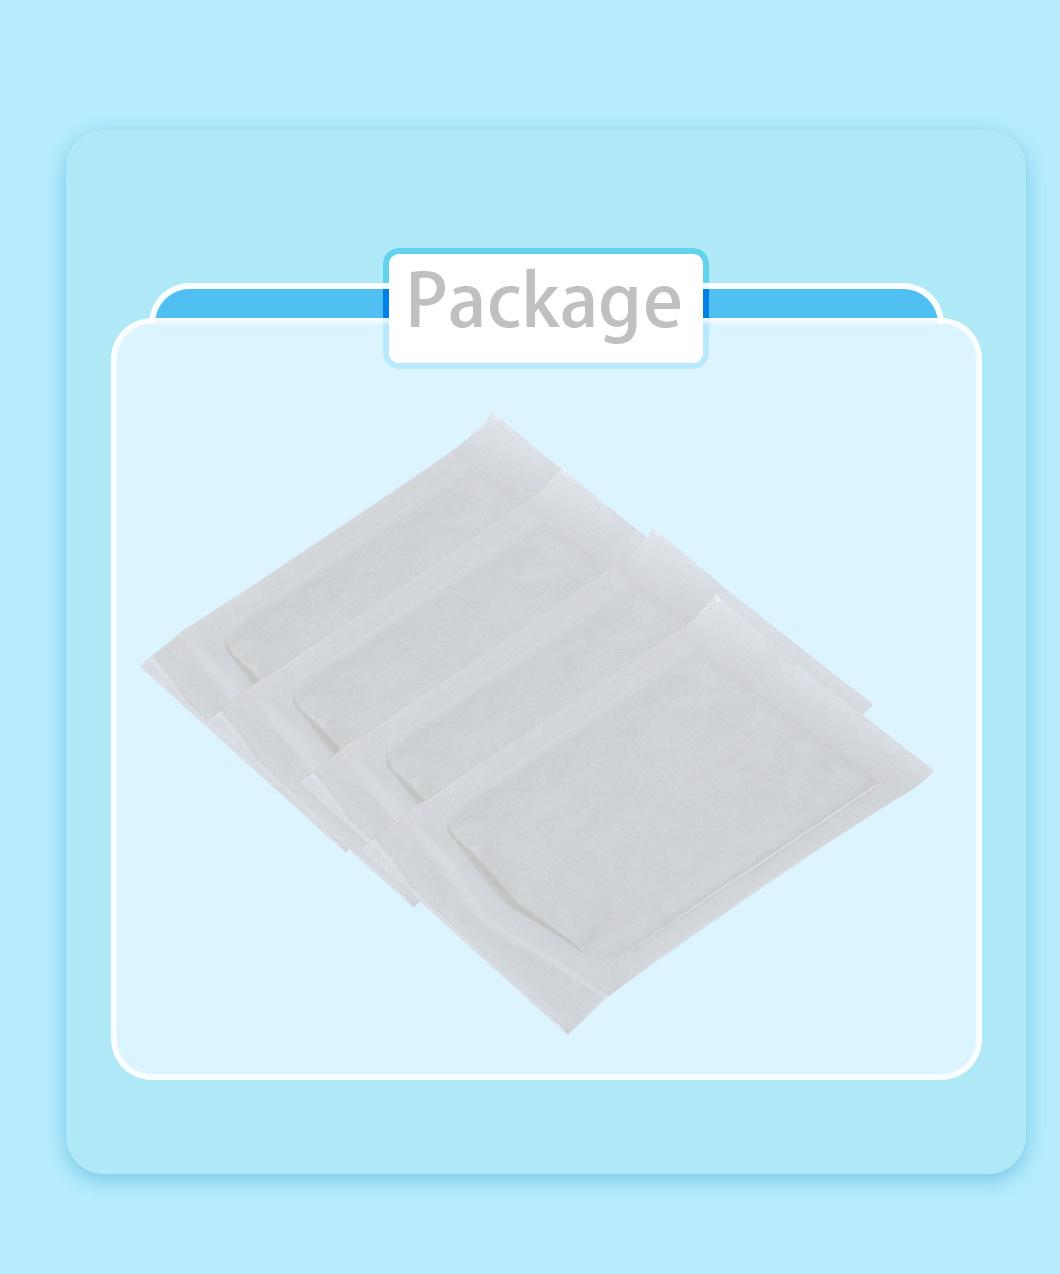 Medical Product Hydrocolloid Dressing Wound